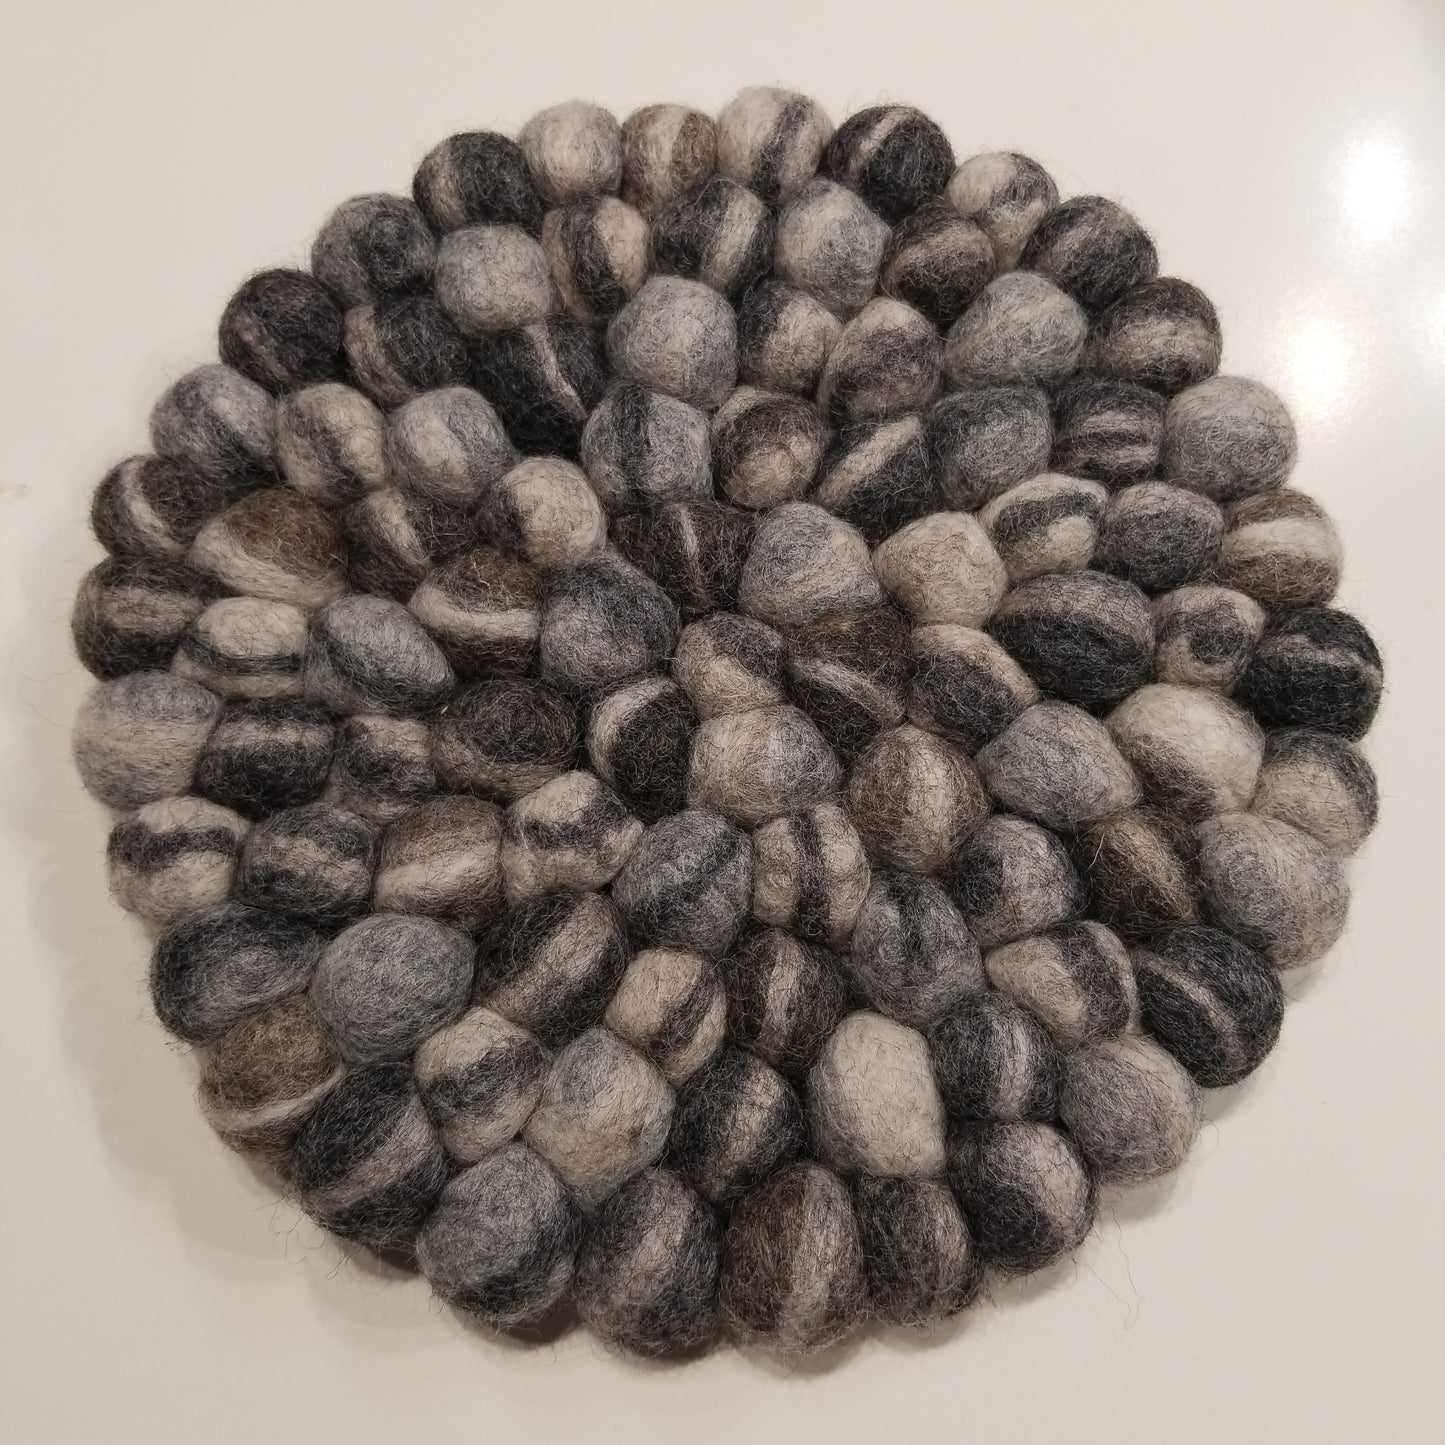 Traditional Felted Wool Trivets - Handmade - Round, Square, Colorful & Neutral!